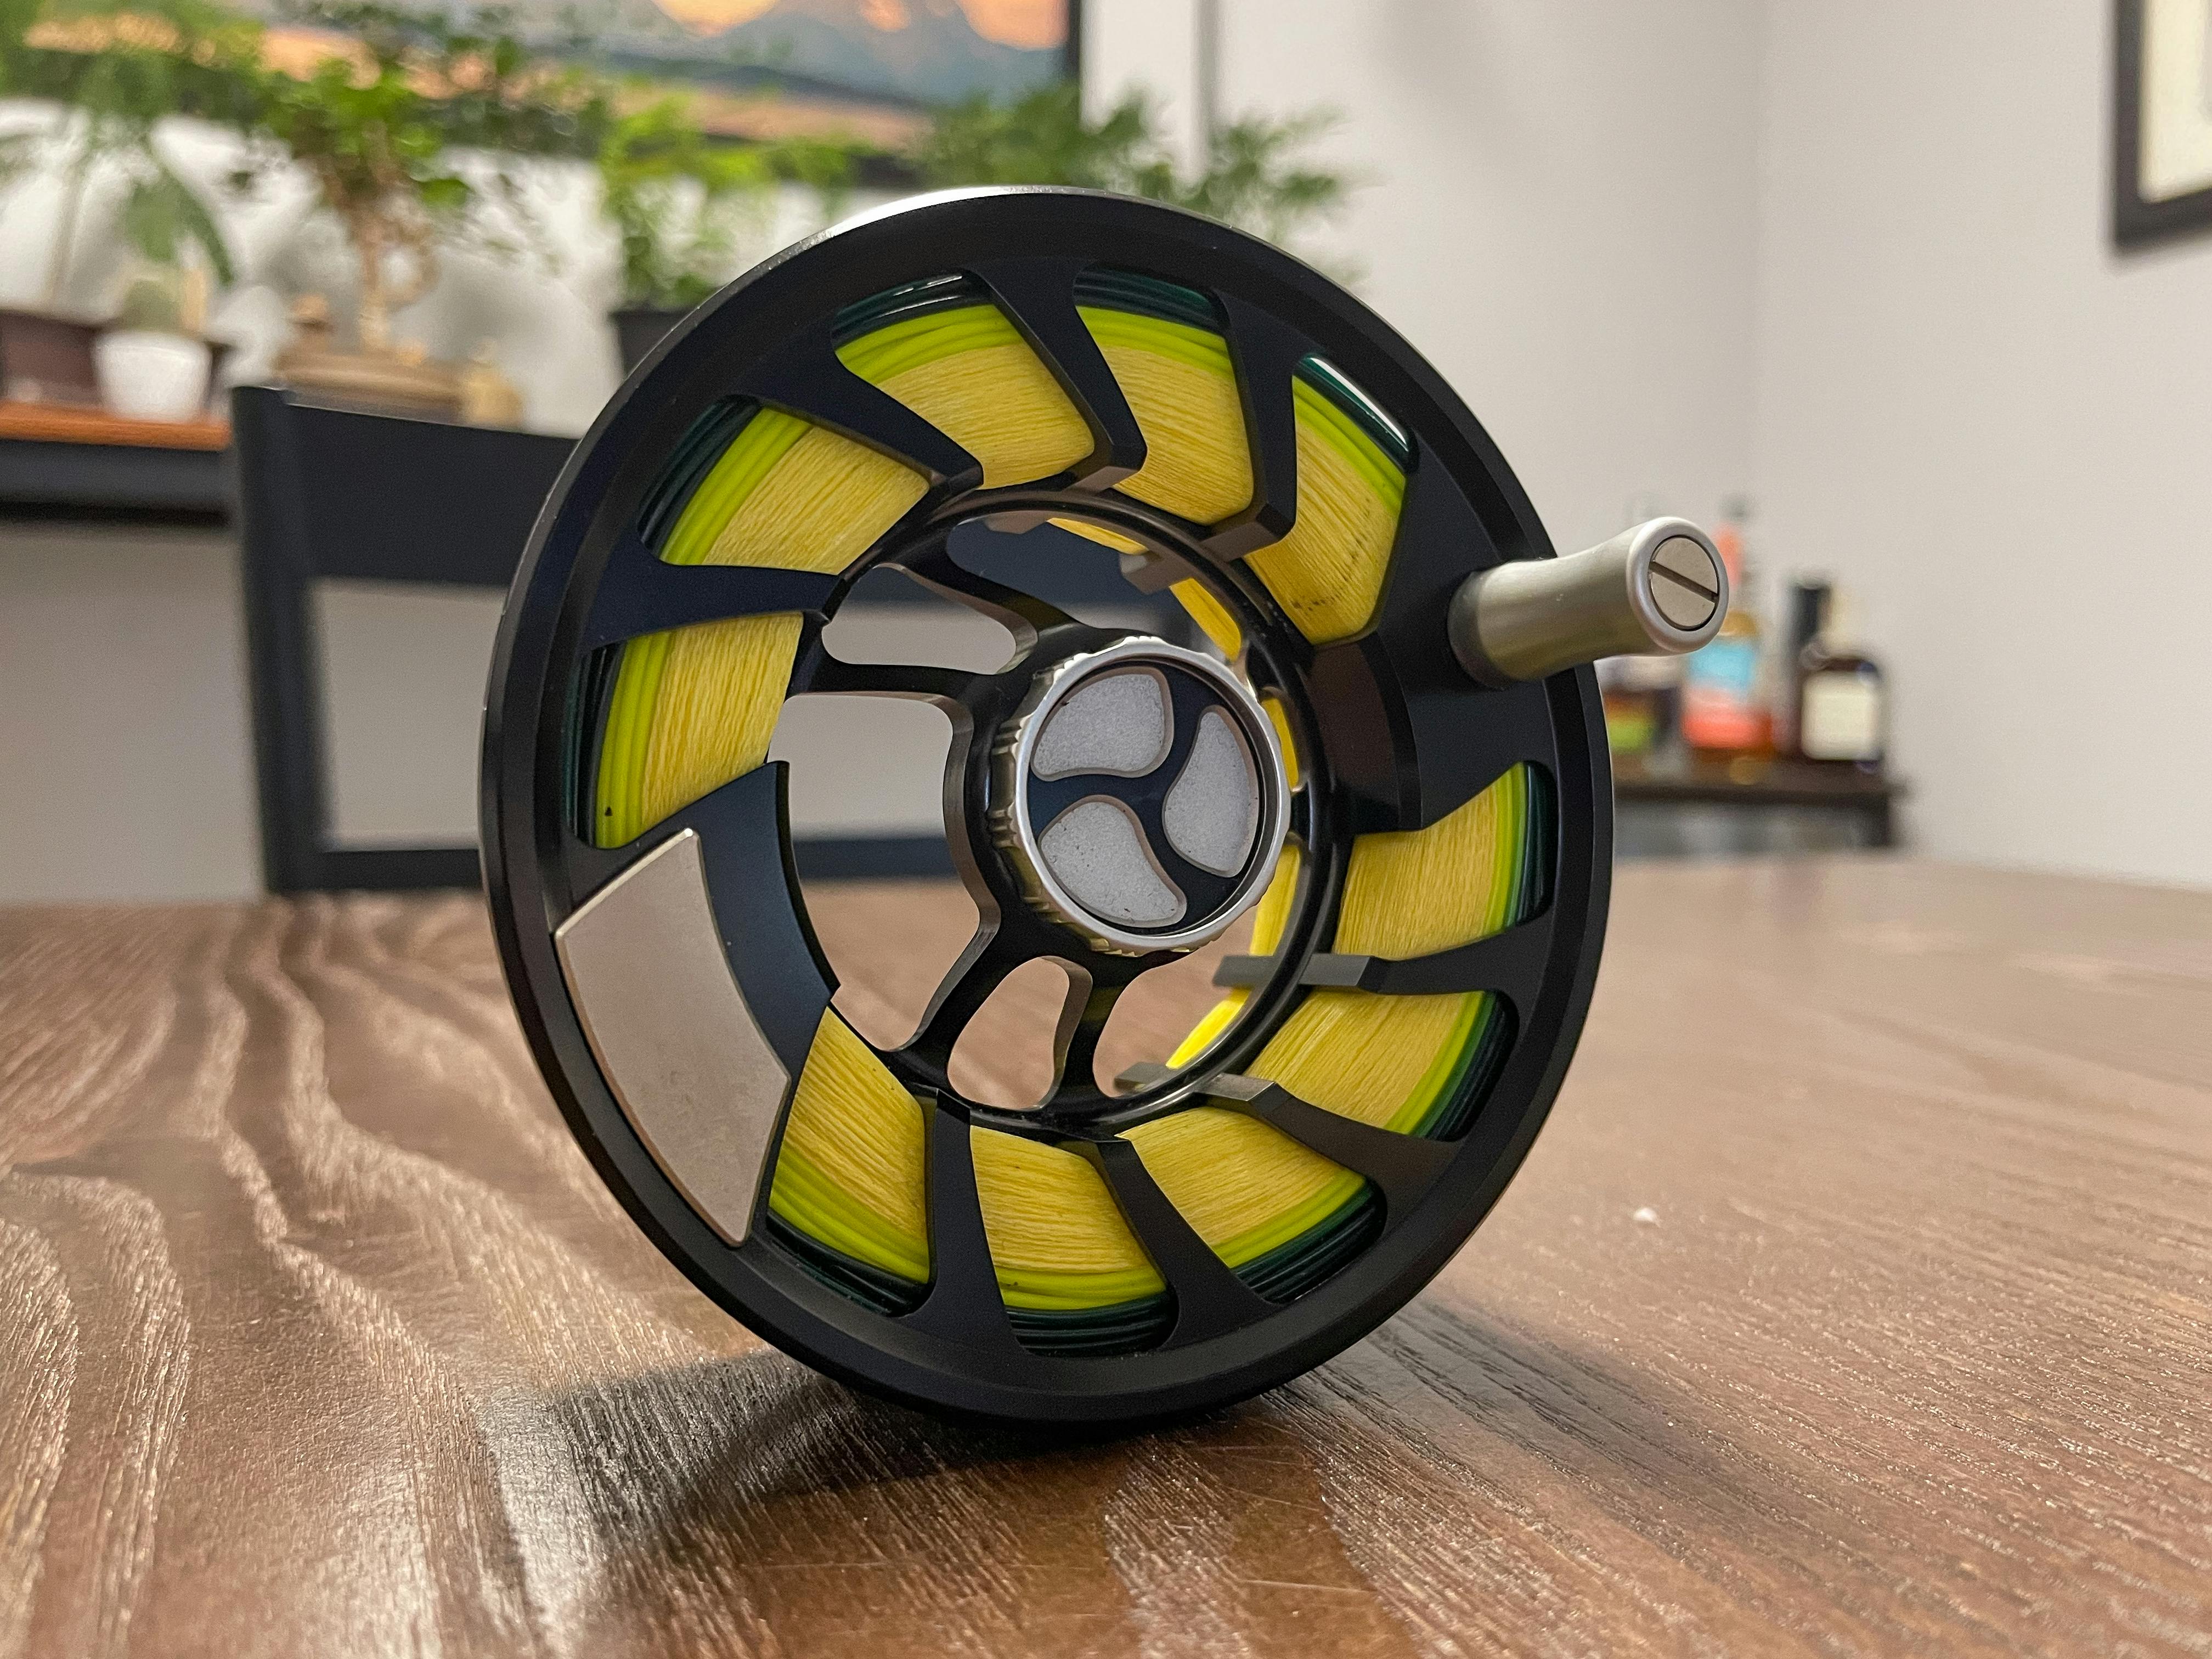 Did ORVIS just make THE BEST CASSETTE REEL?! 